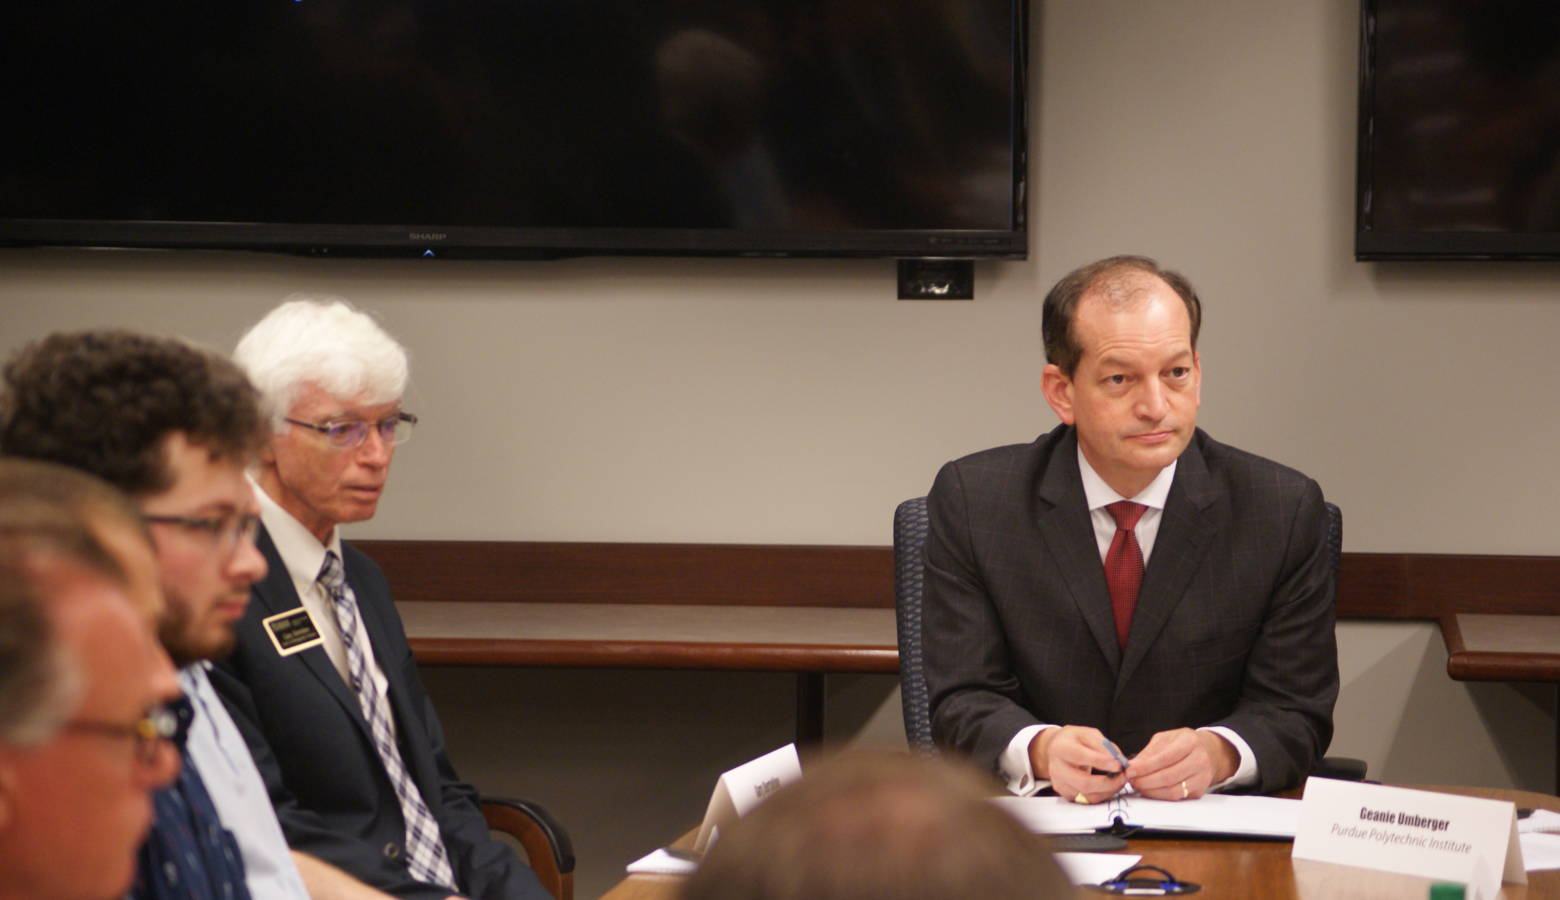 U.S. Secretary of Labor Alexander Acosta participates in a roundtable discussion with Indiana cybersecurity businesses and Purdue students and faculty. (Samantha Horton/IPB News)